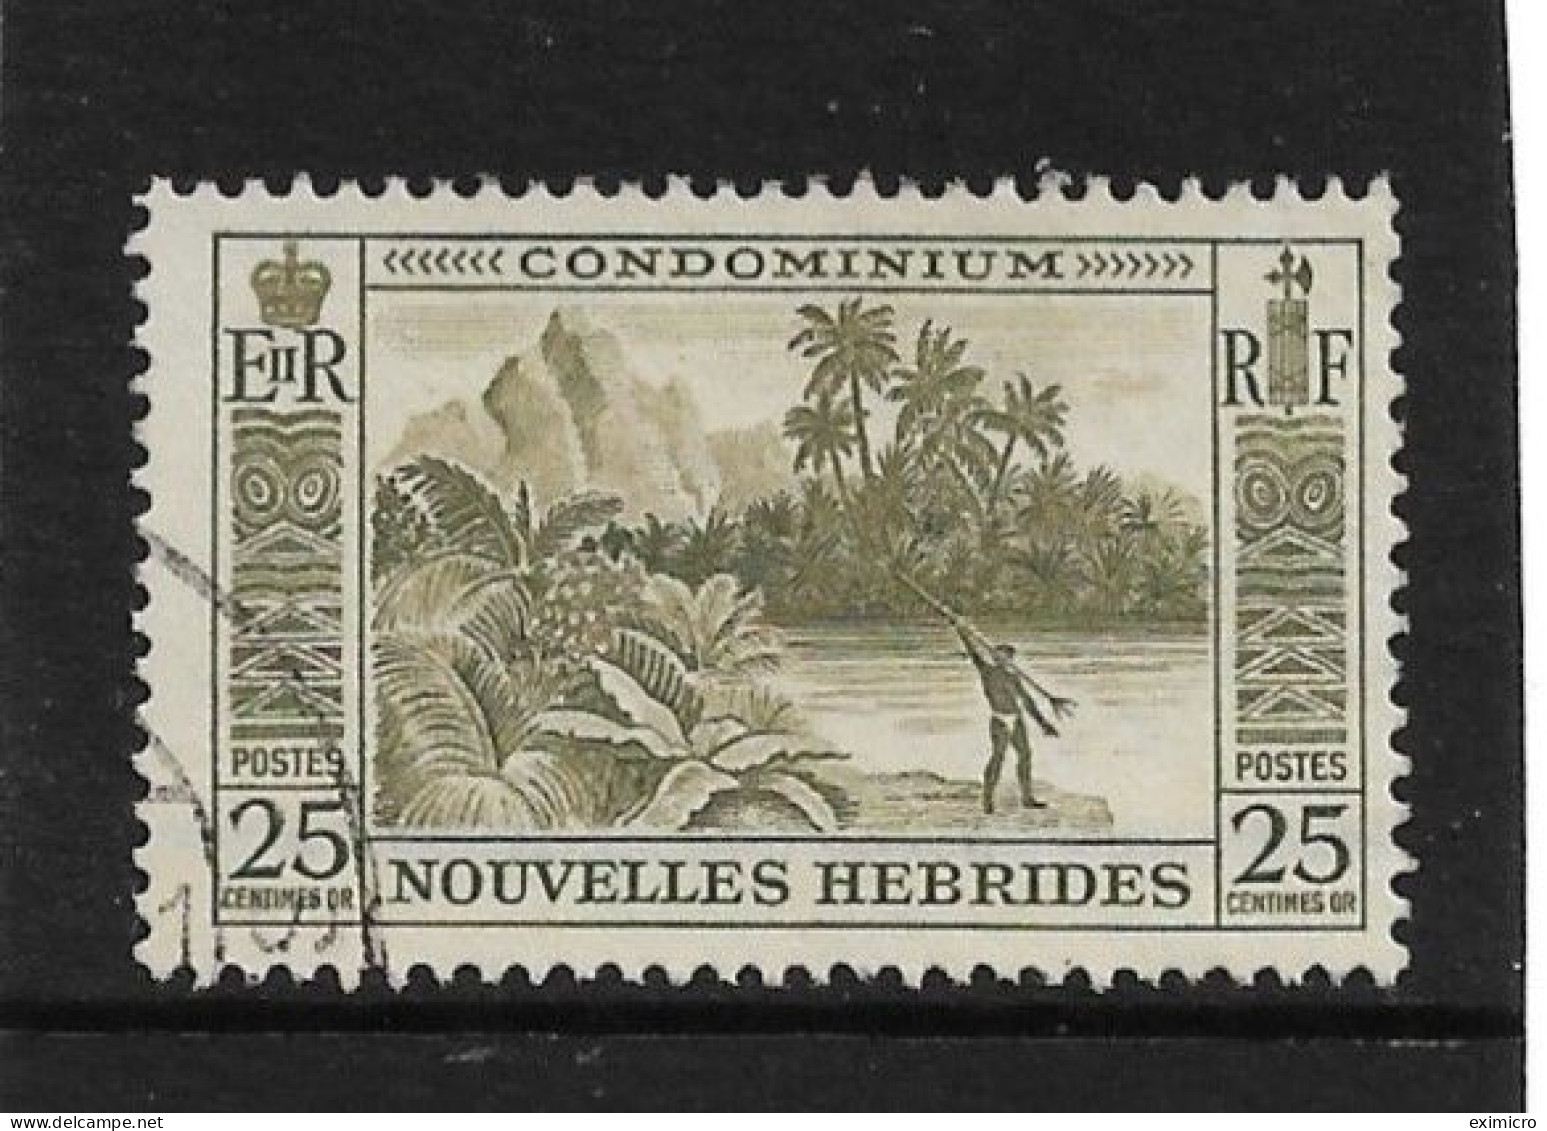 NEW HEBRIDES (FRENCH CURRENCY) 1957 25c SG F100 FINE USED - Oblitérés